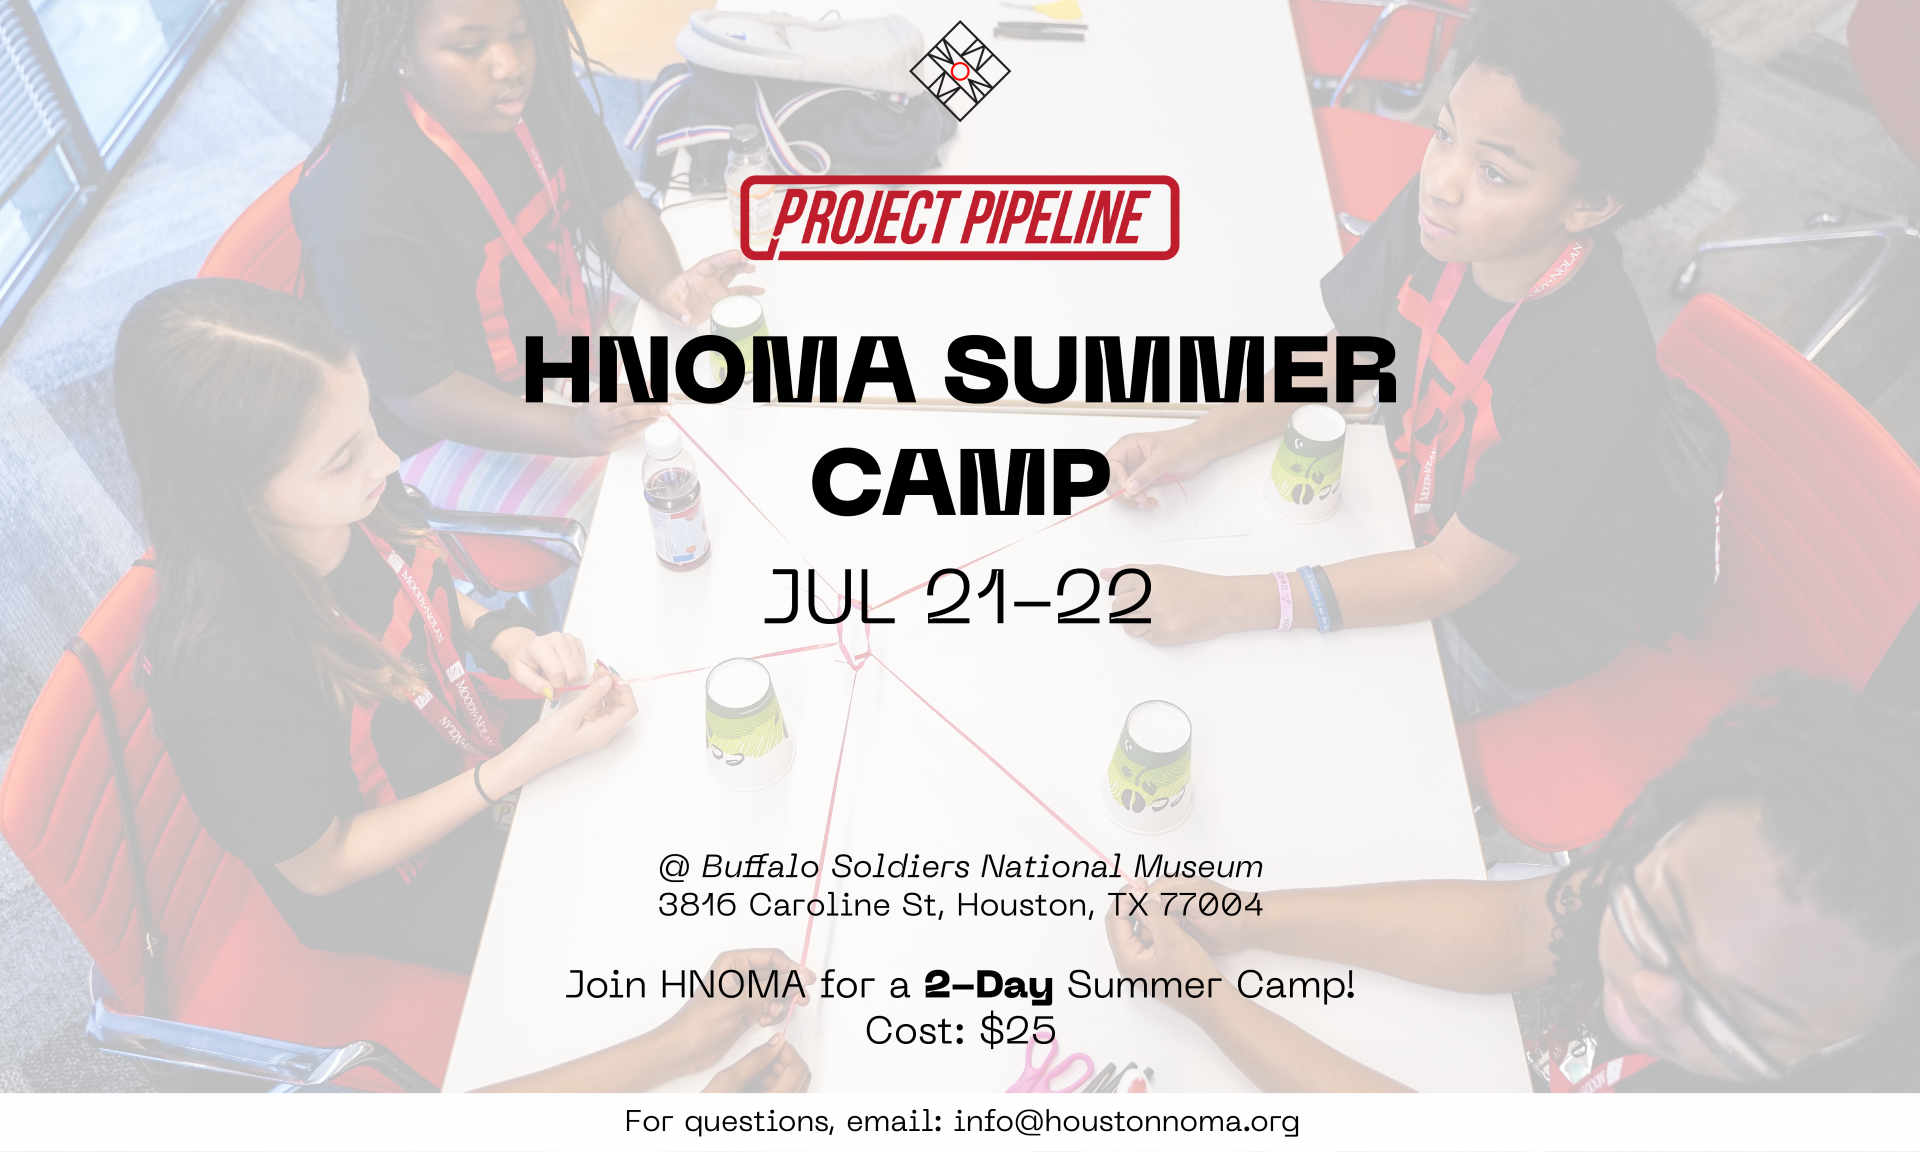 HNOMA Project Pipeline